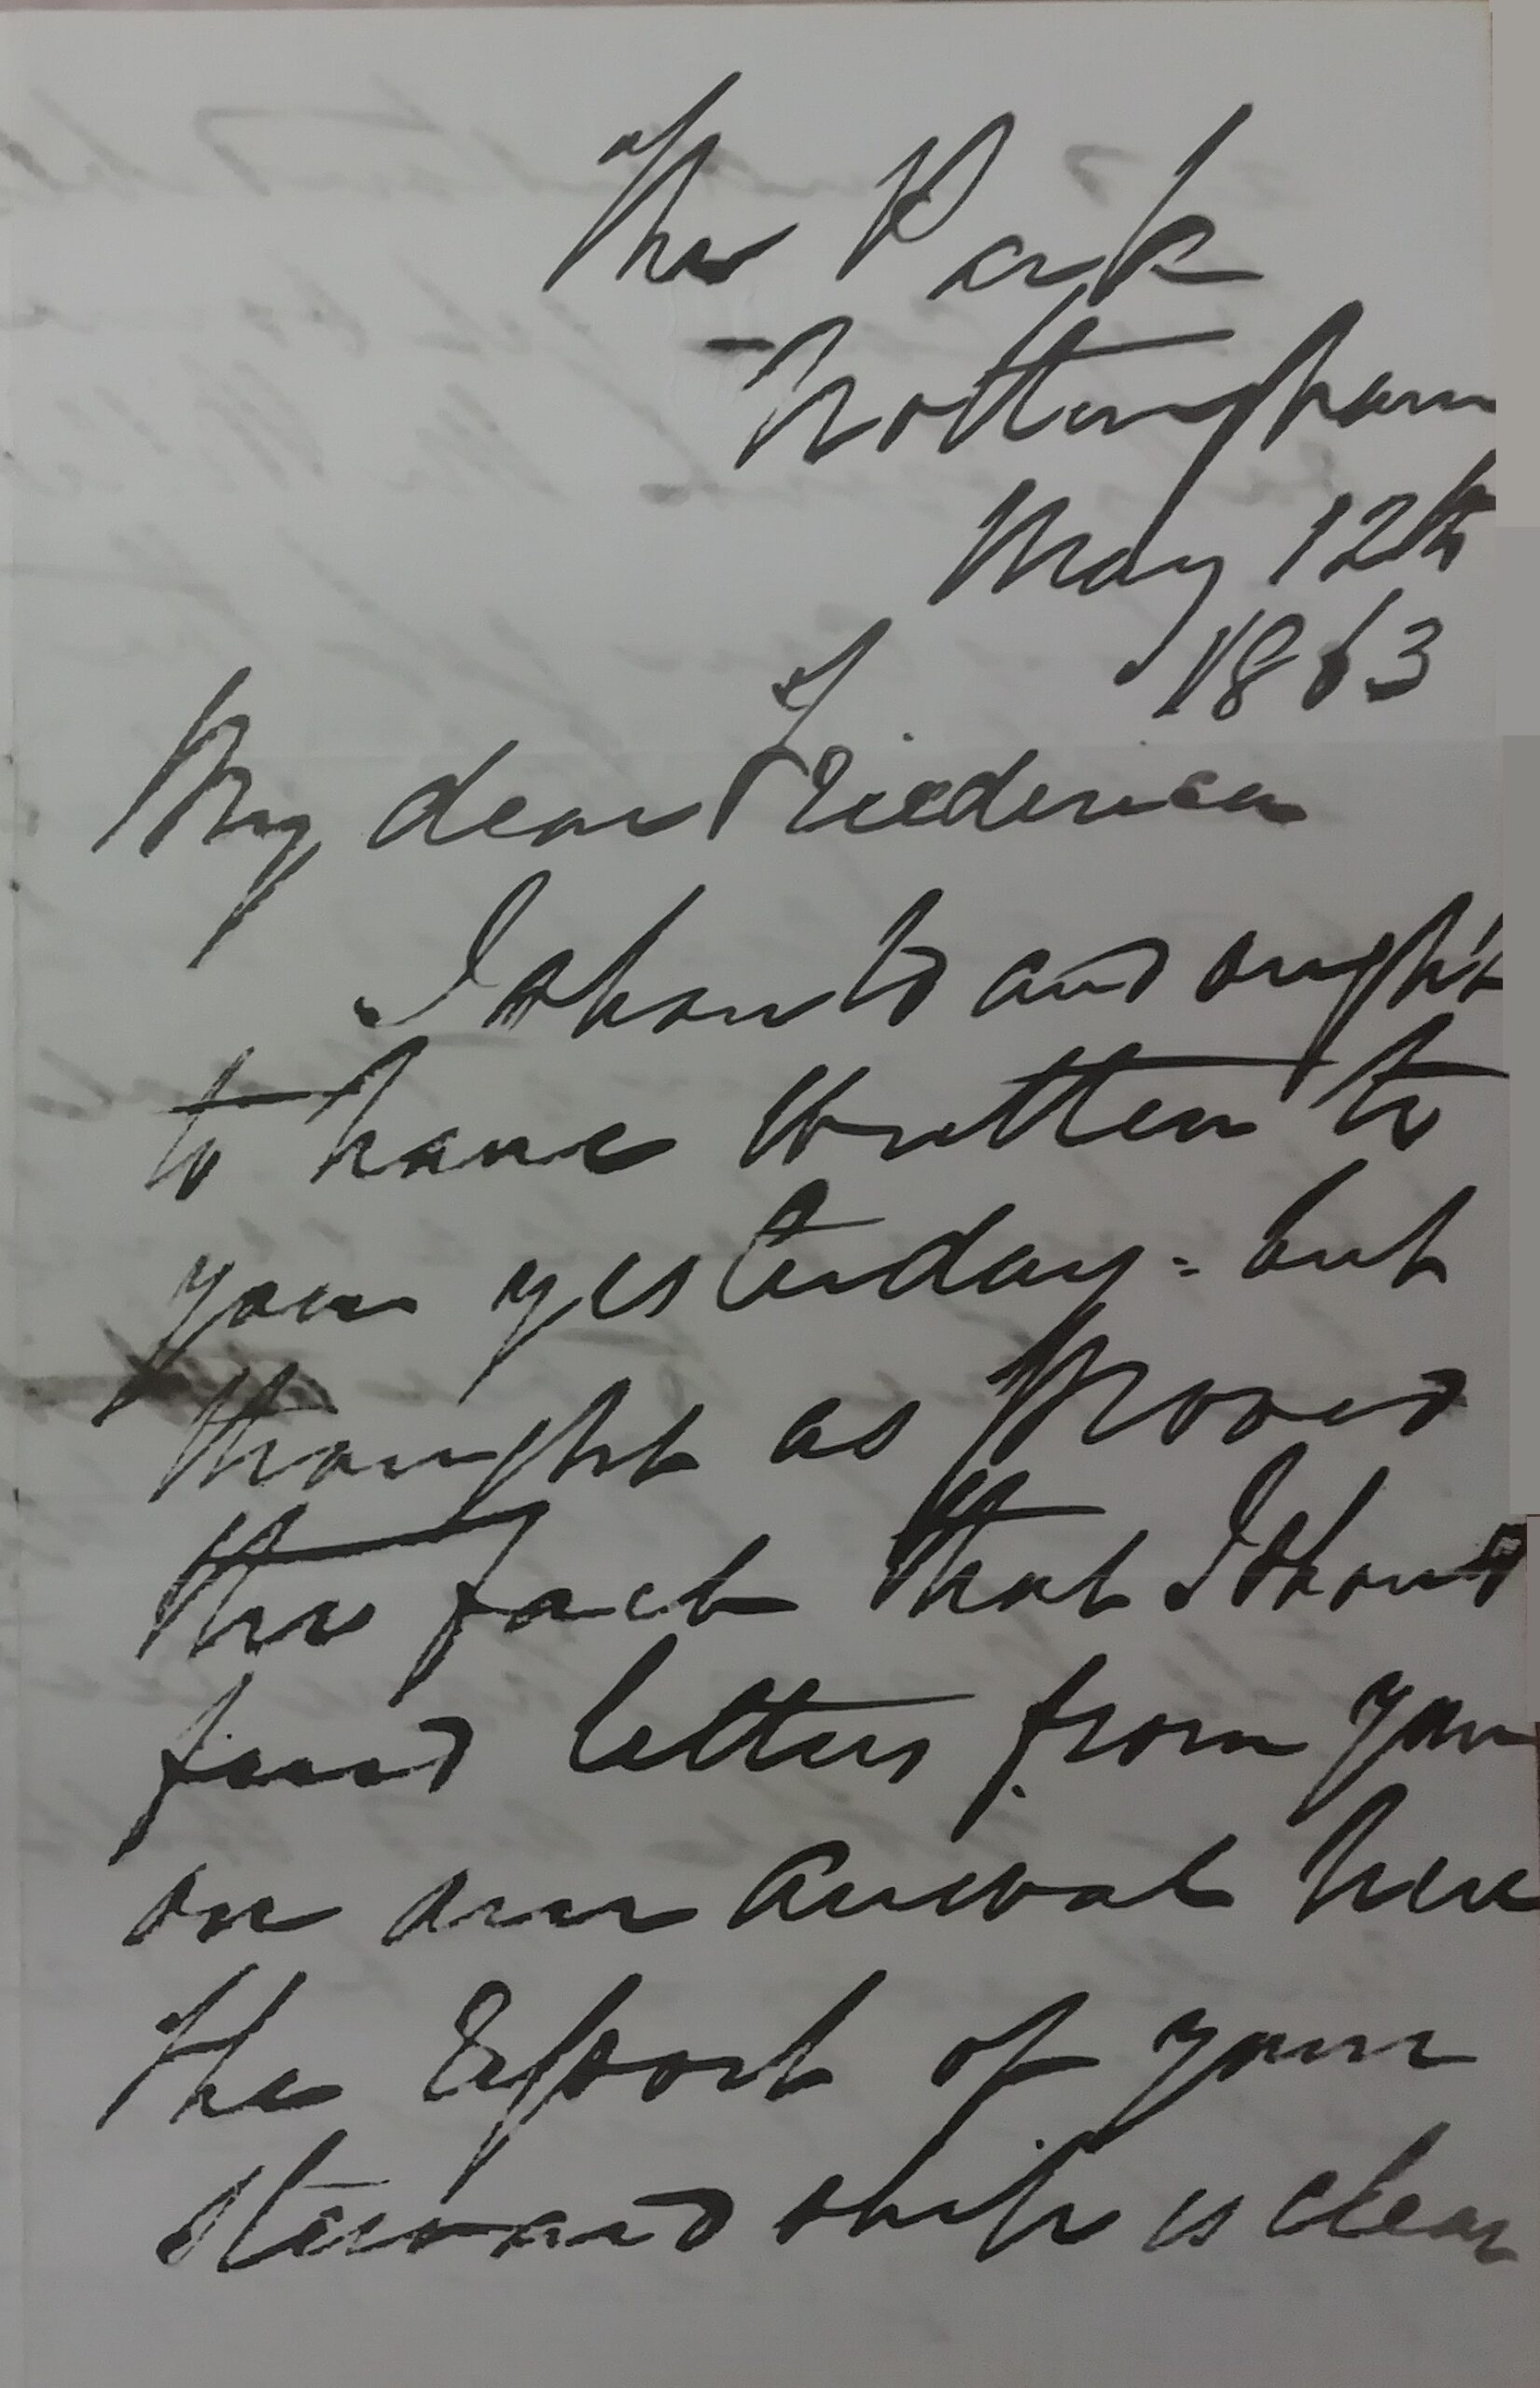 A letter from Robert Gill to his daughter Frederica, dated 12th May 1863.